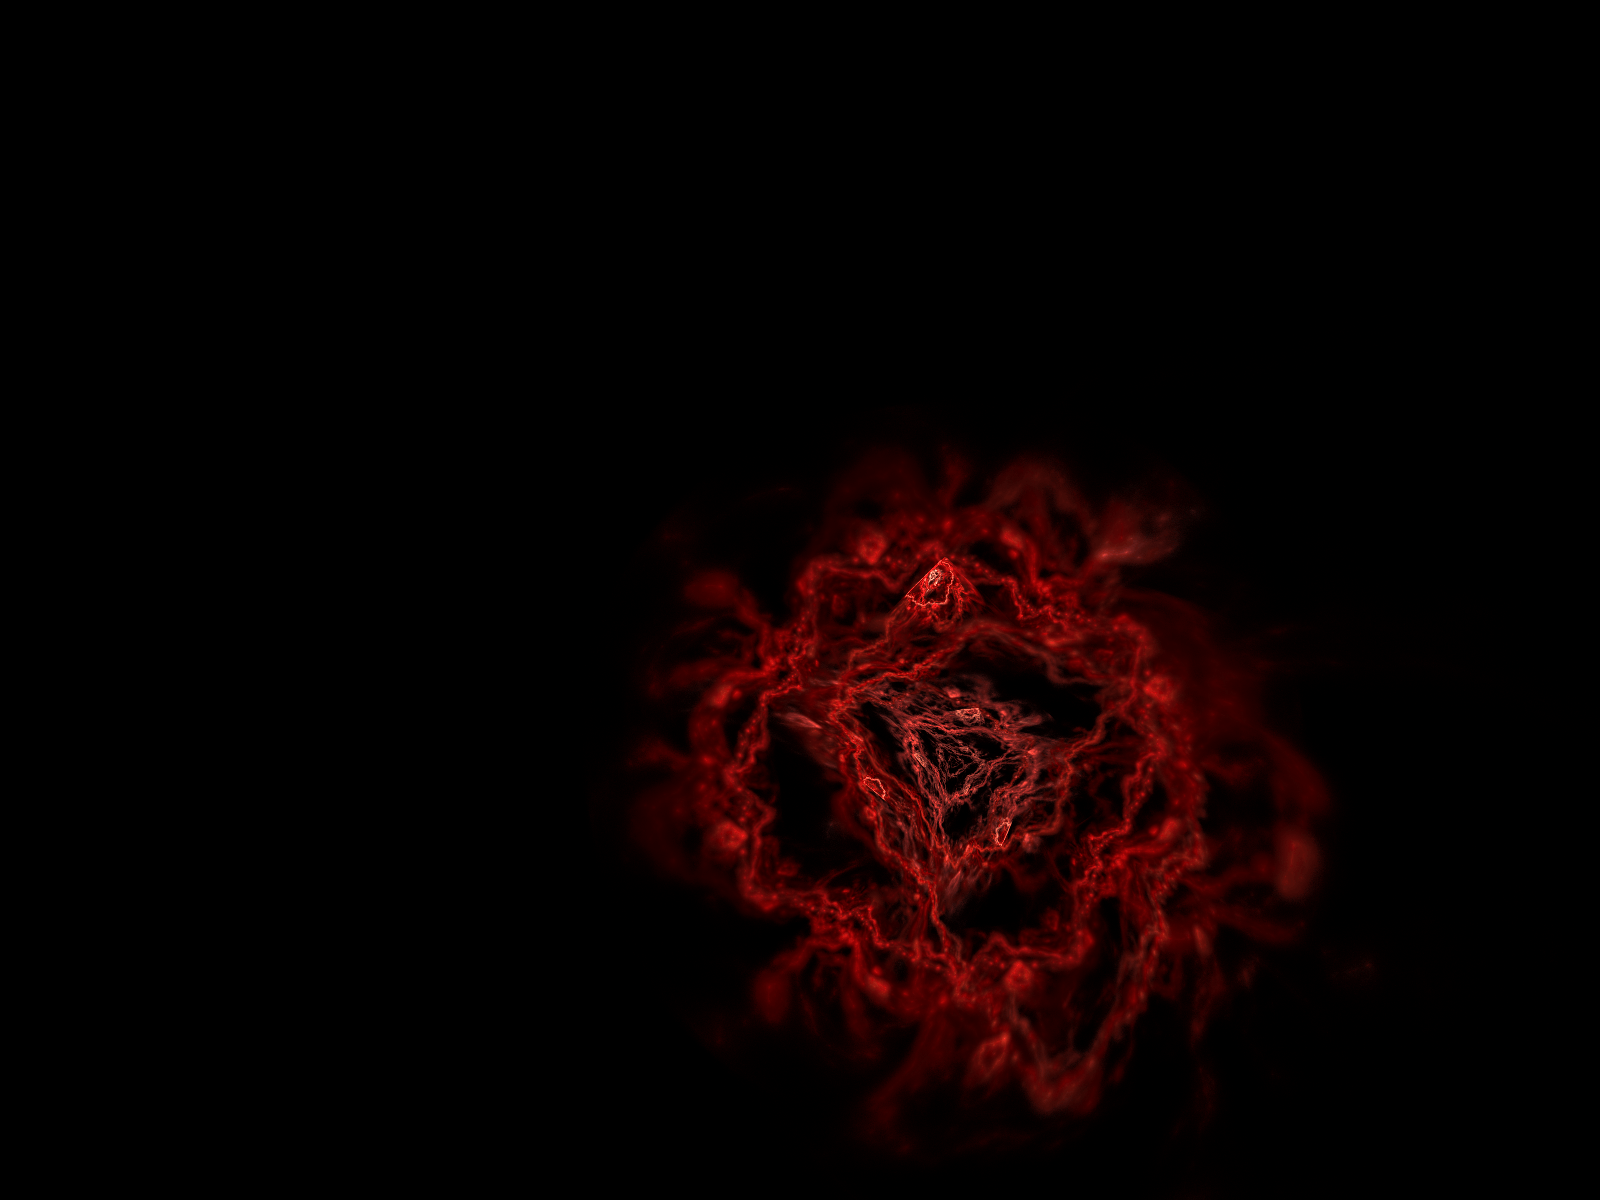 Red Rose With Black Backgrounds - Wallpaper Cave